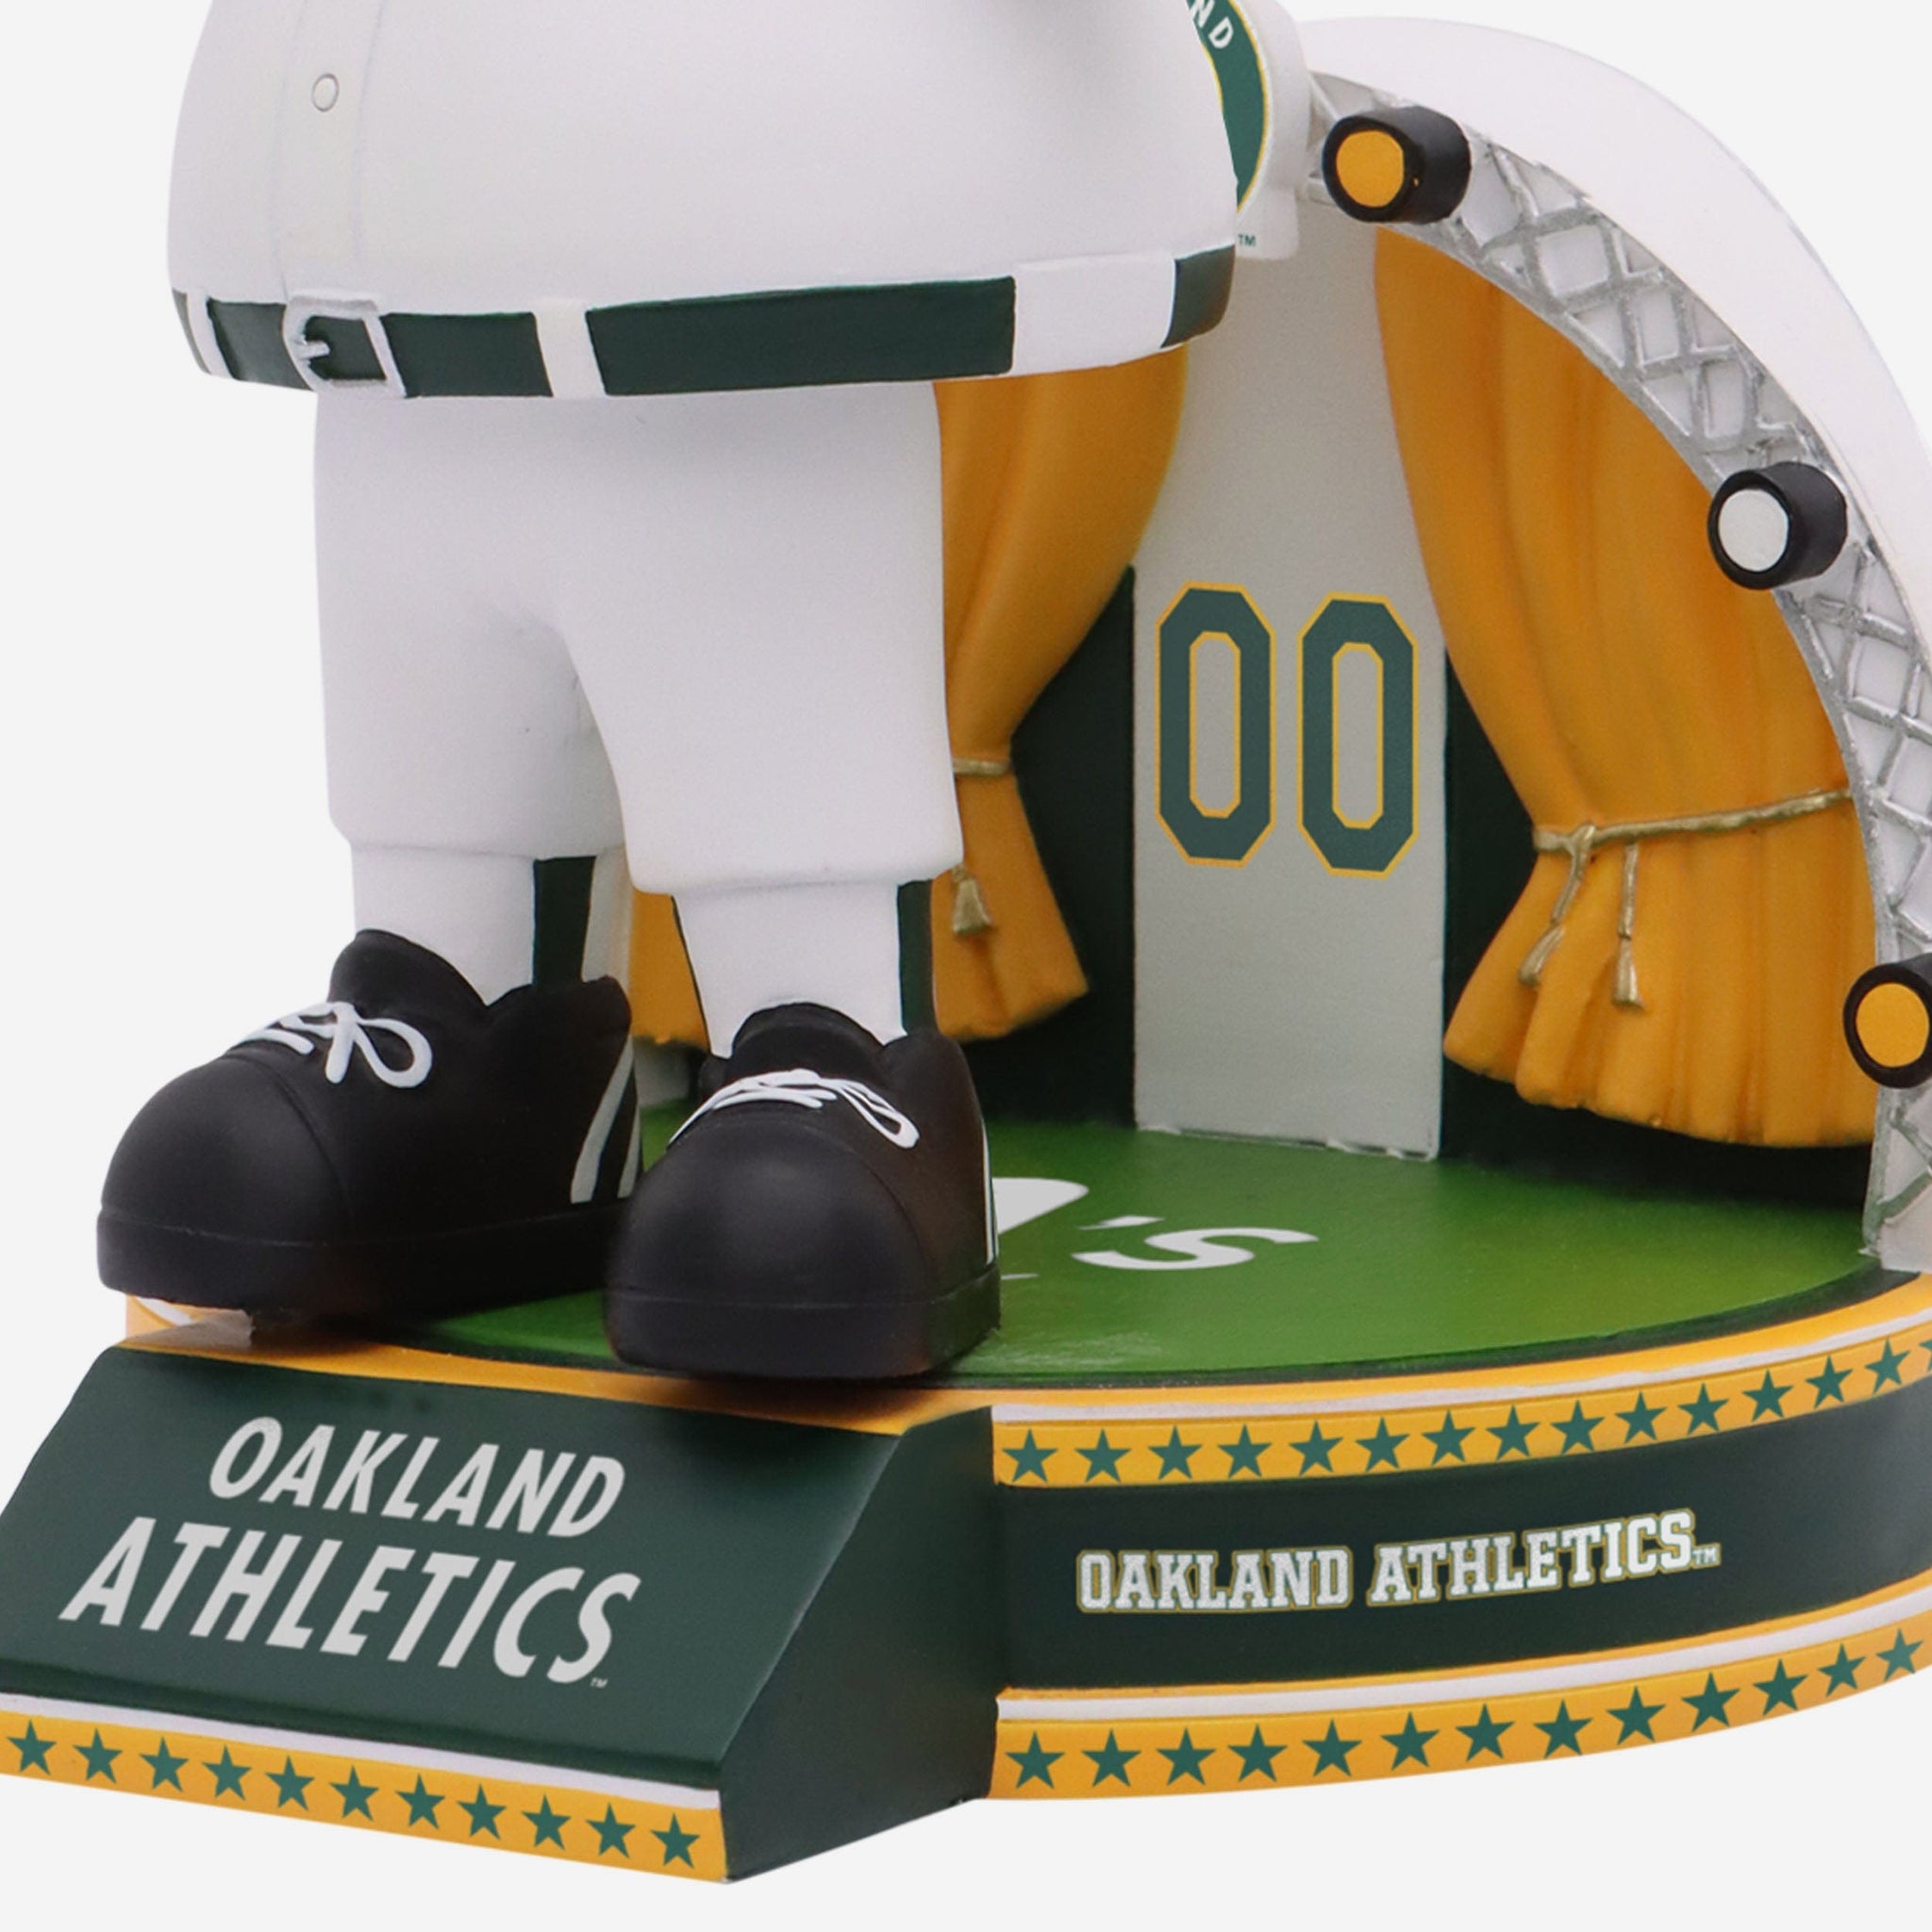 Show Your A's Pride With The Stomper Oakland A's Mascot Belly Bobblehead -  Sports Illustrated Oakland Athletics News, Analysis and More